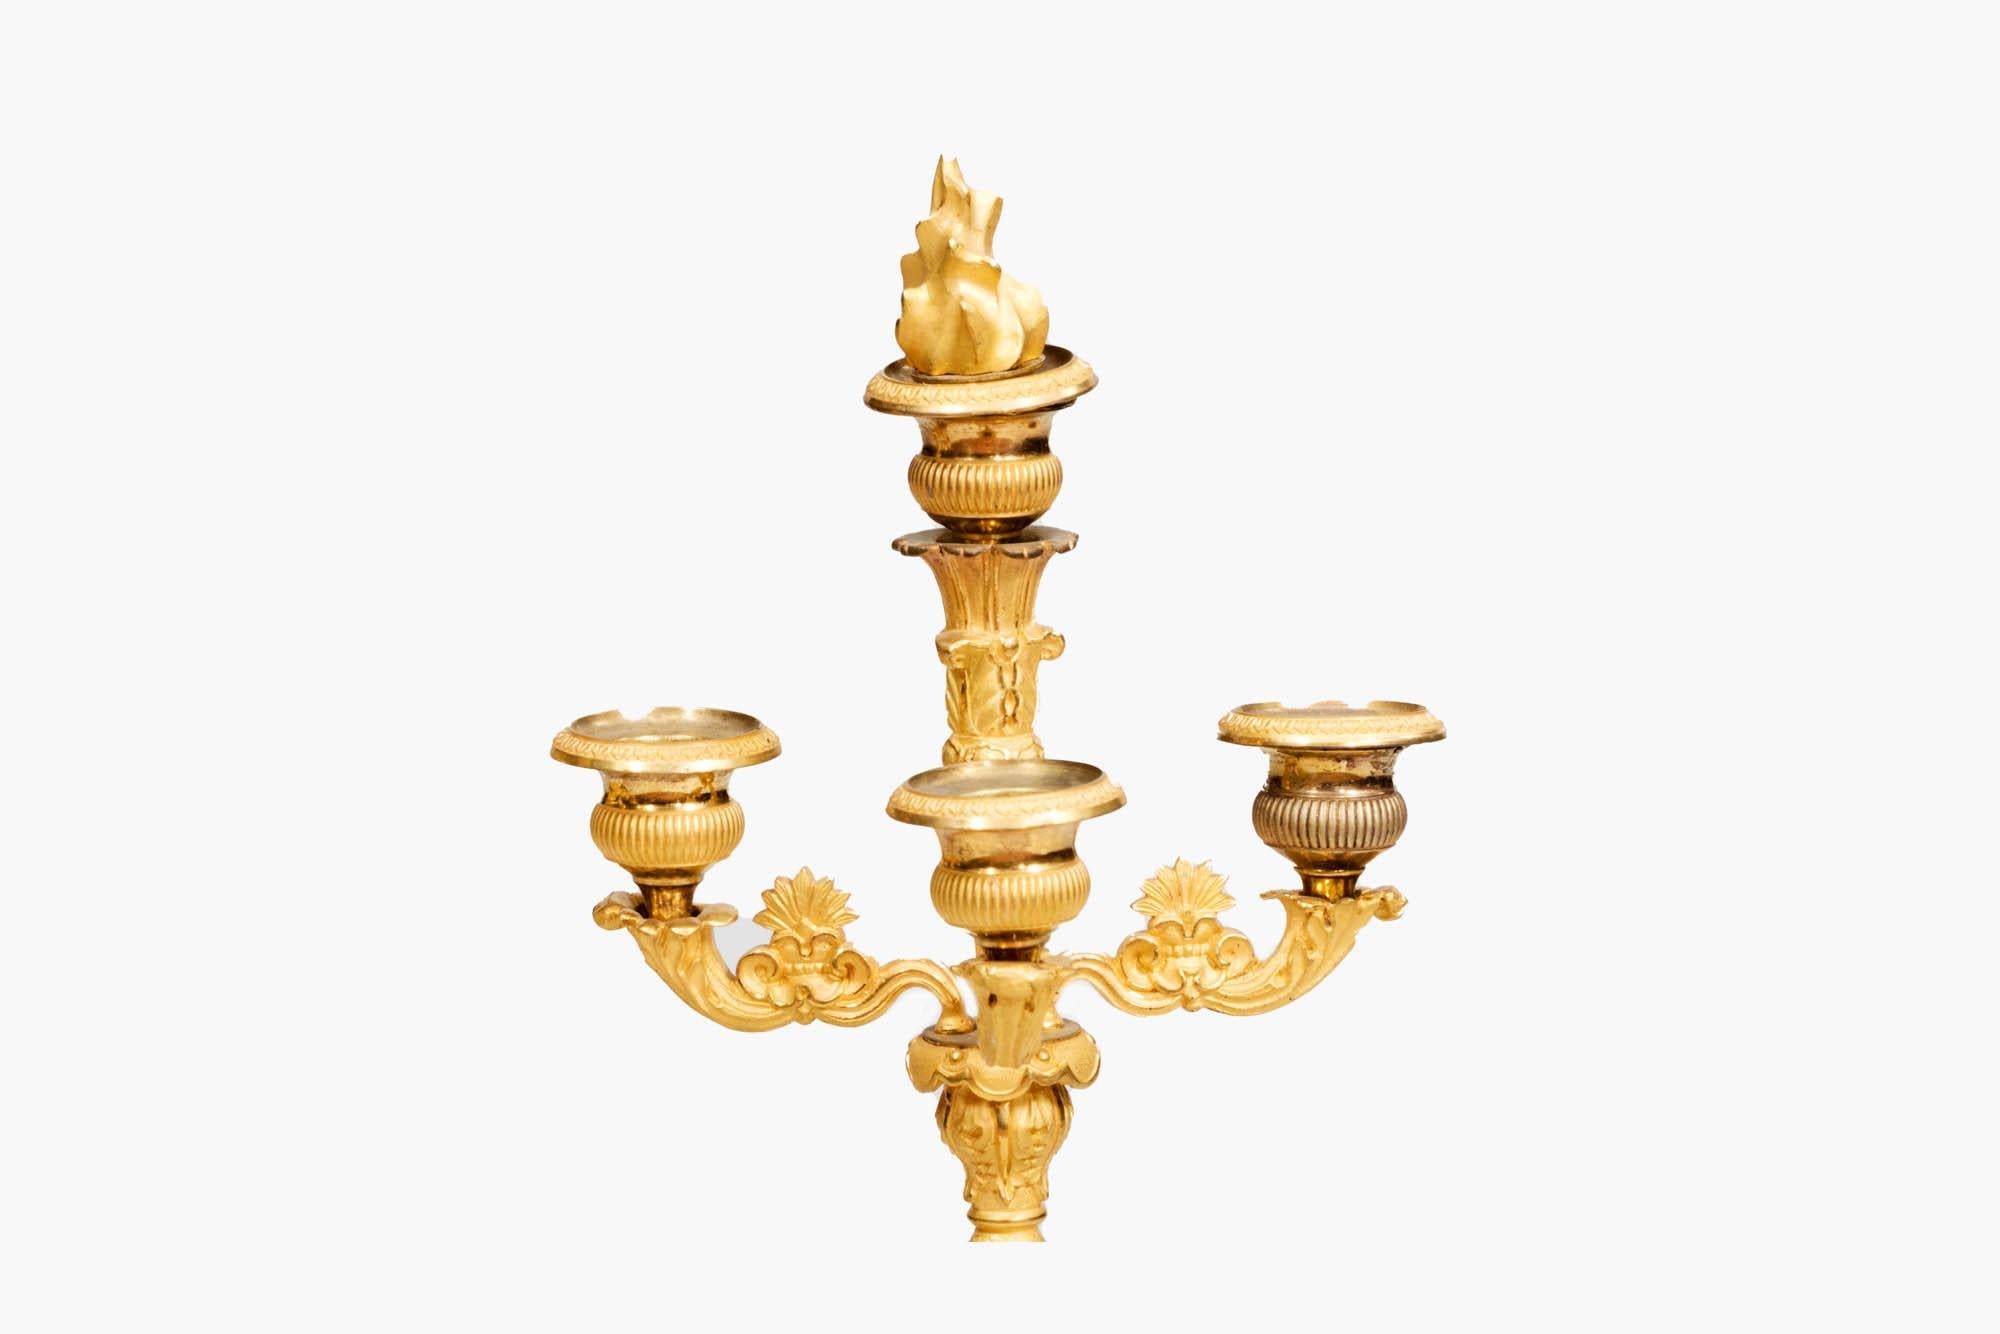 Pair of Regency French ormolu gilded candelabras featuring Turkish figures supporting three foliate carved candle branches with urn-shaped bobeches. On both, the central stem is topped with an ornamental gilt-bronze flame that can be removed and an